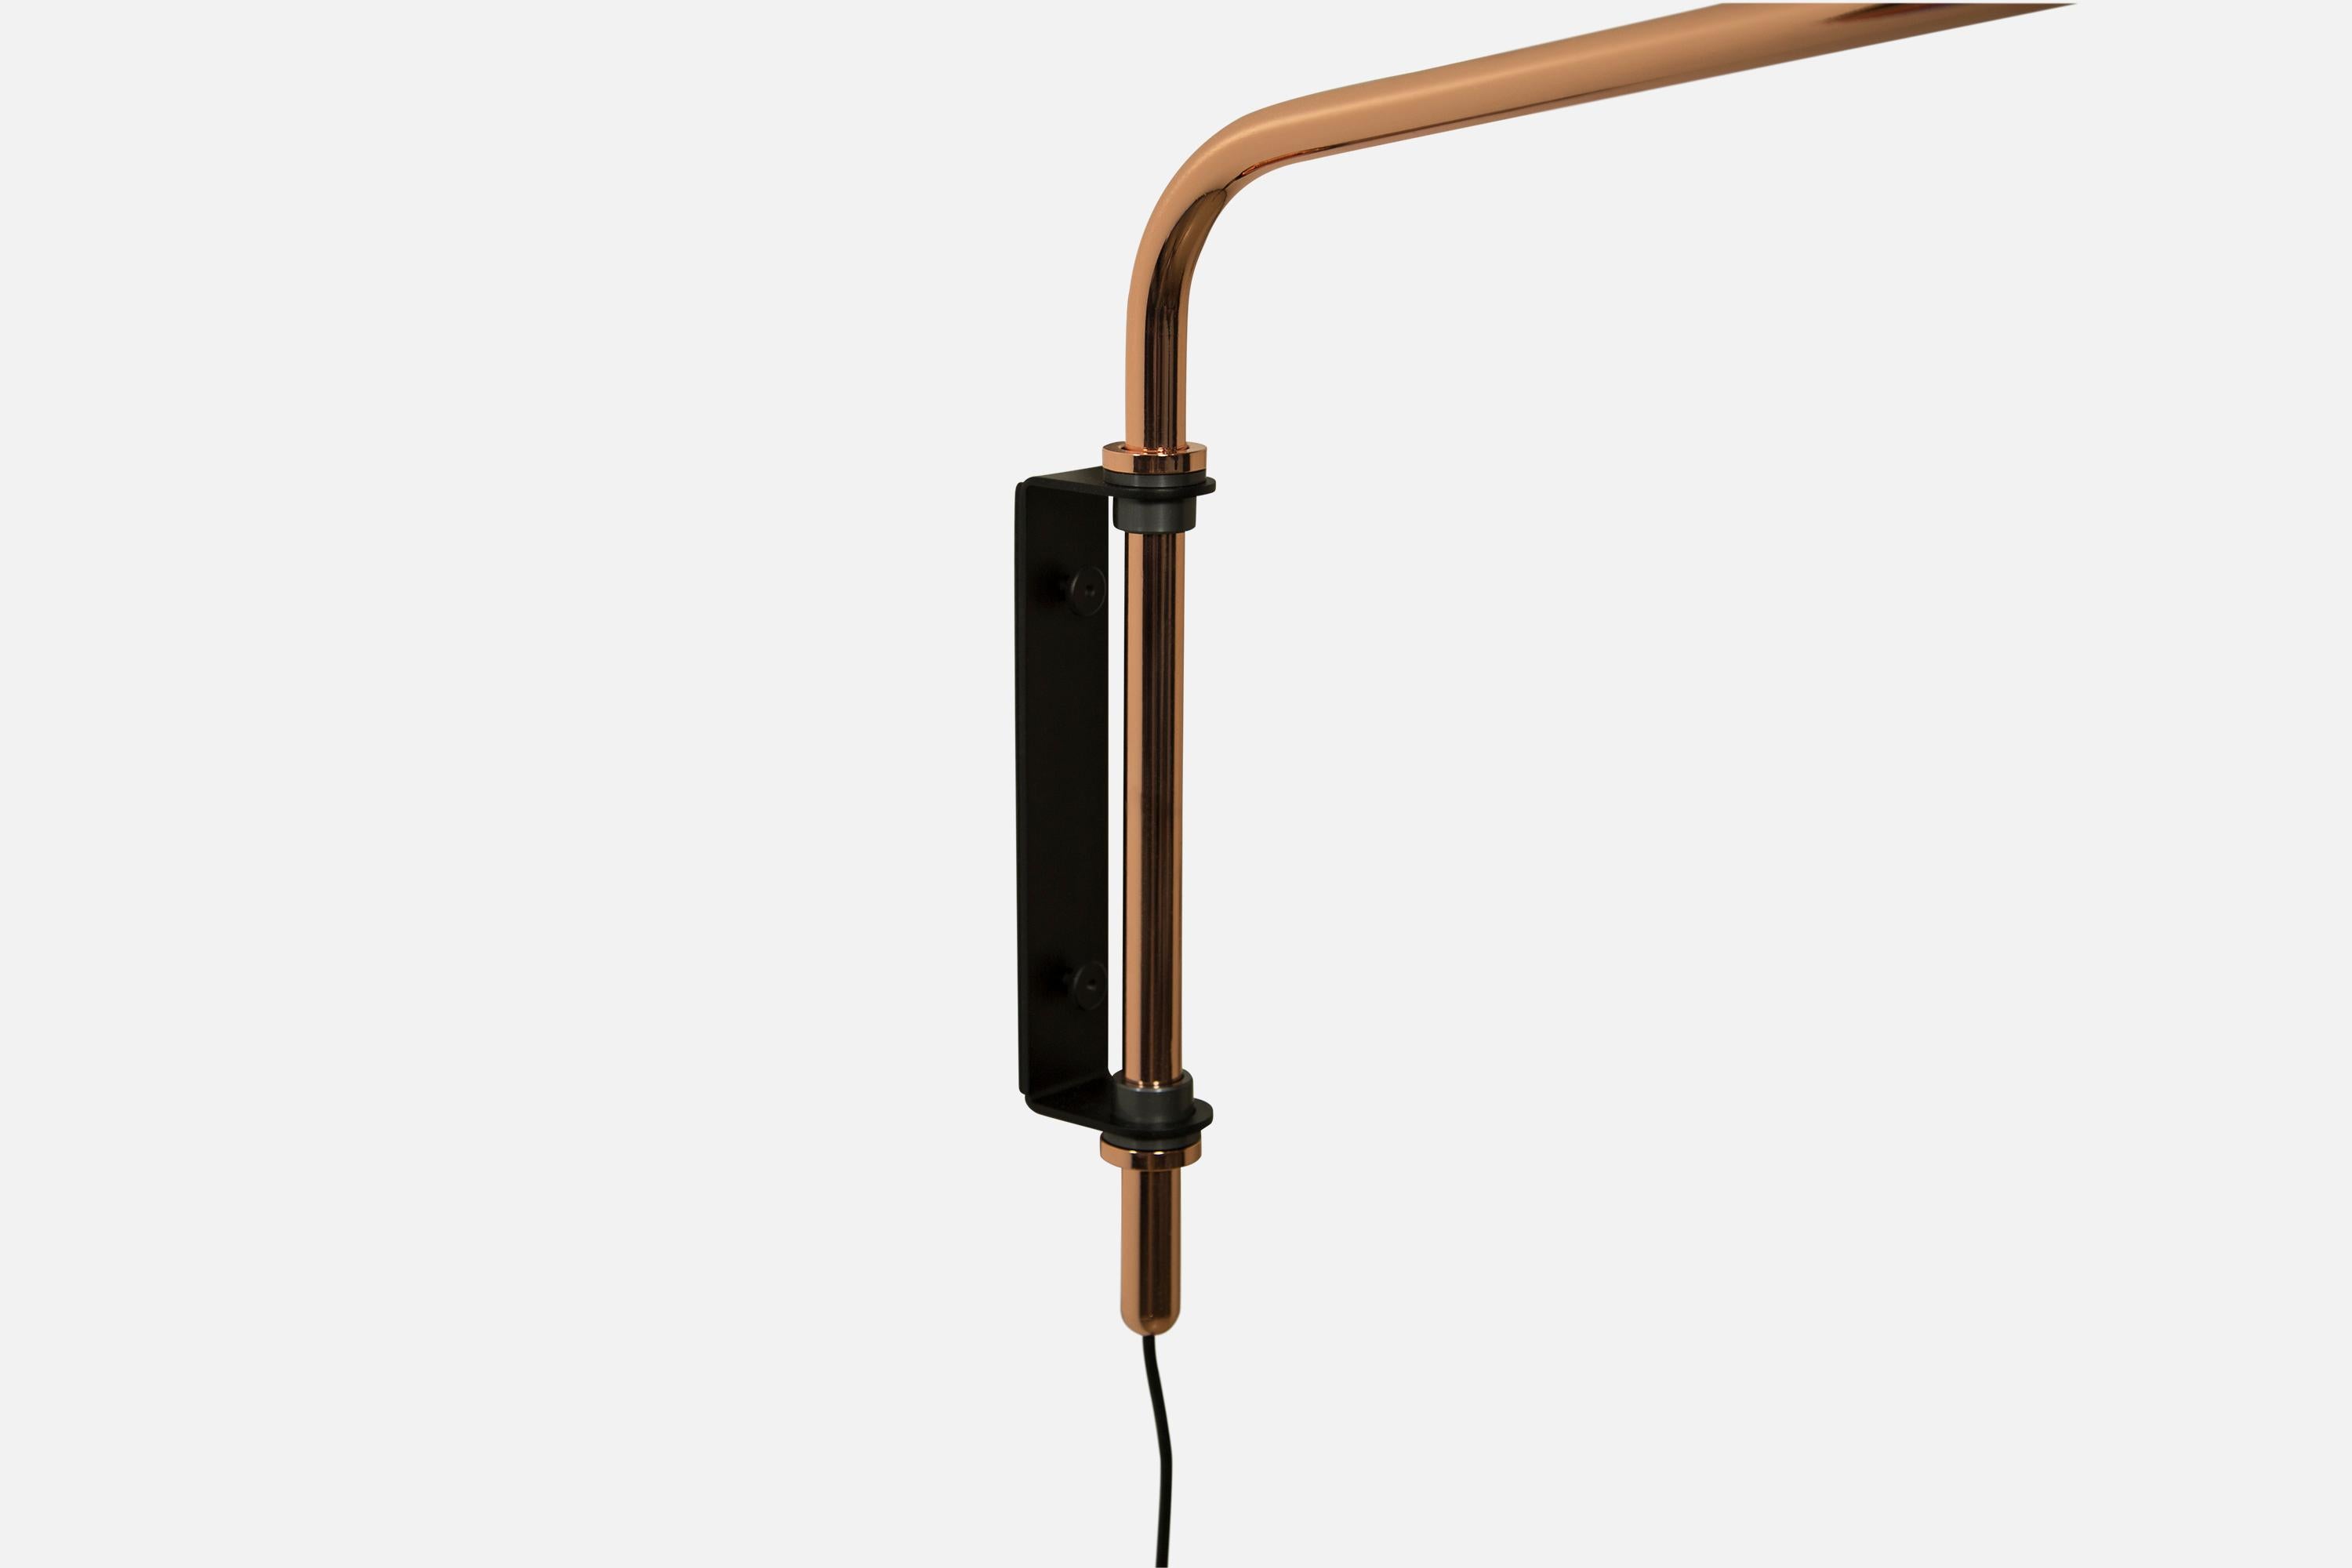 The signal arm sconce is a rotatable sconce that seamlessly blend the Mid-Century Modern aesthetic with that of science fiction. A bent aluminum tube cantilevers from a wall-mounted bracket to allow the spun shade to hover above any interior. Clean,